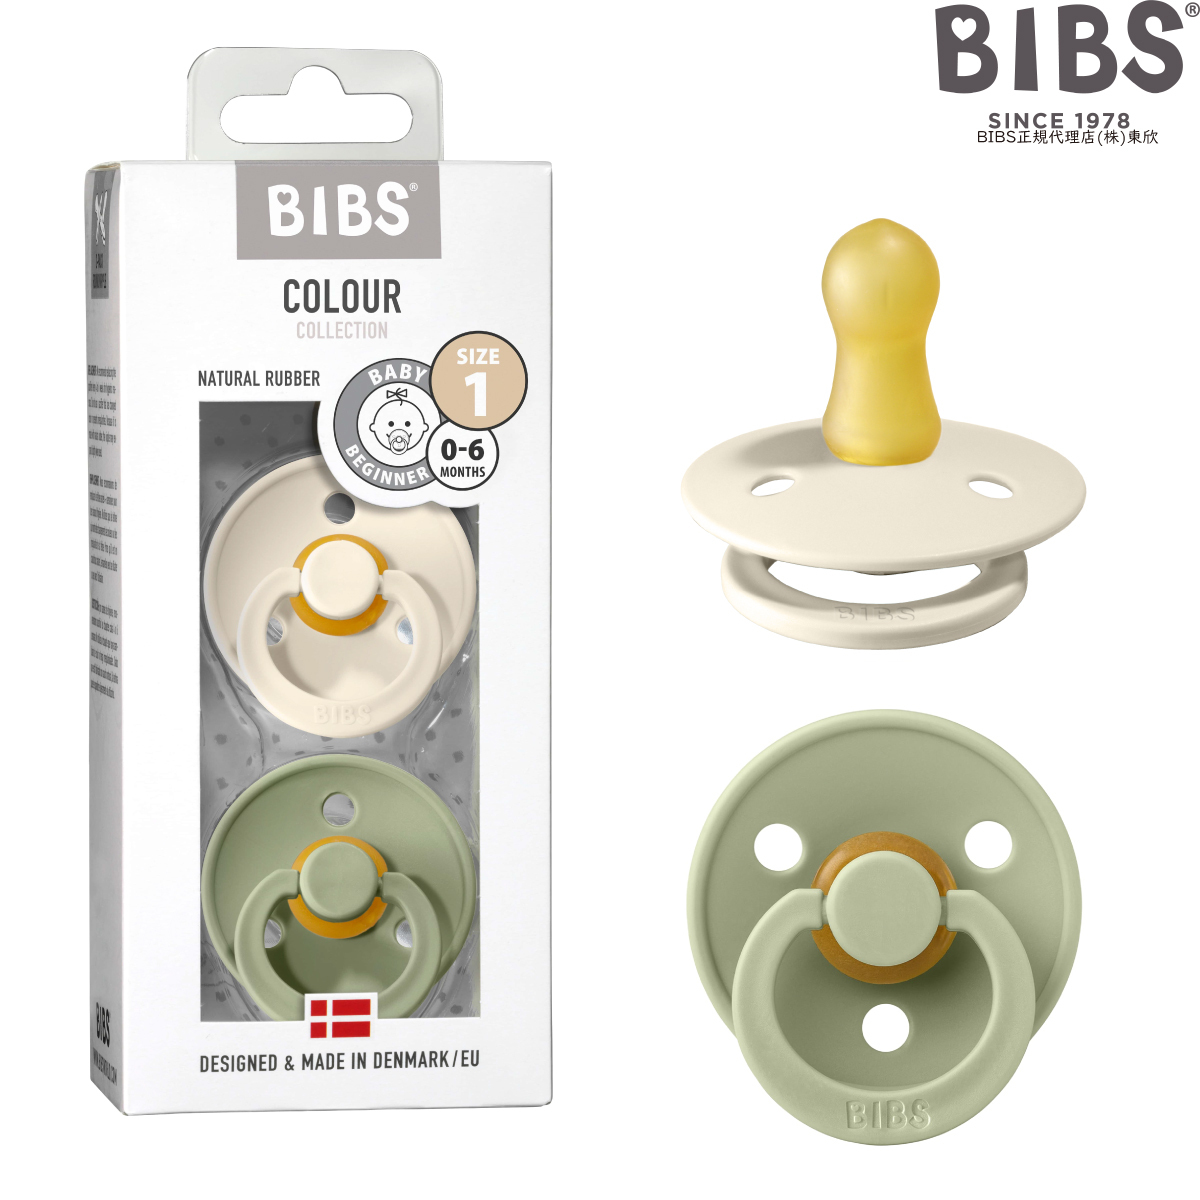 BIBS ( bib s) natural rubber pacifier 2 piece set |COLOUR Designed&Made in Denmark celebration gift celebration of a birth recommendation 